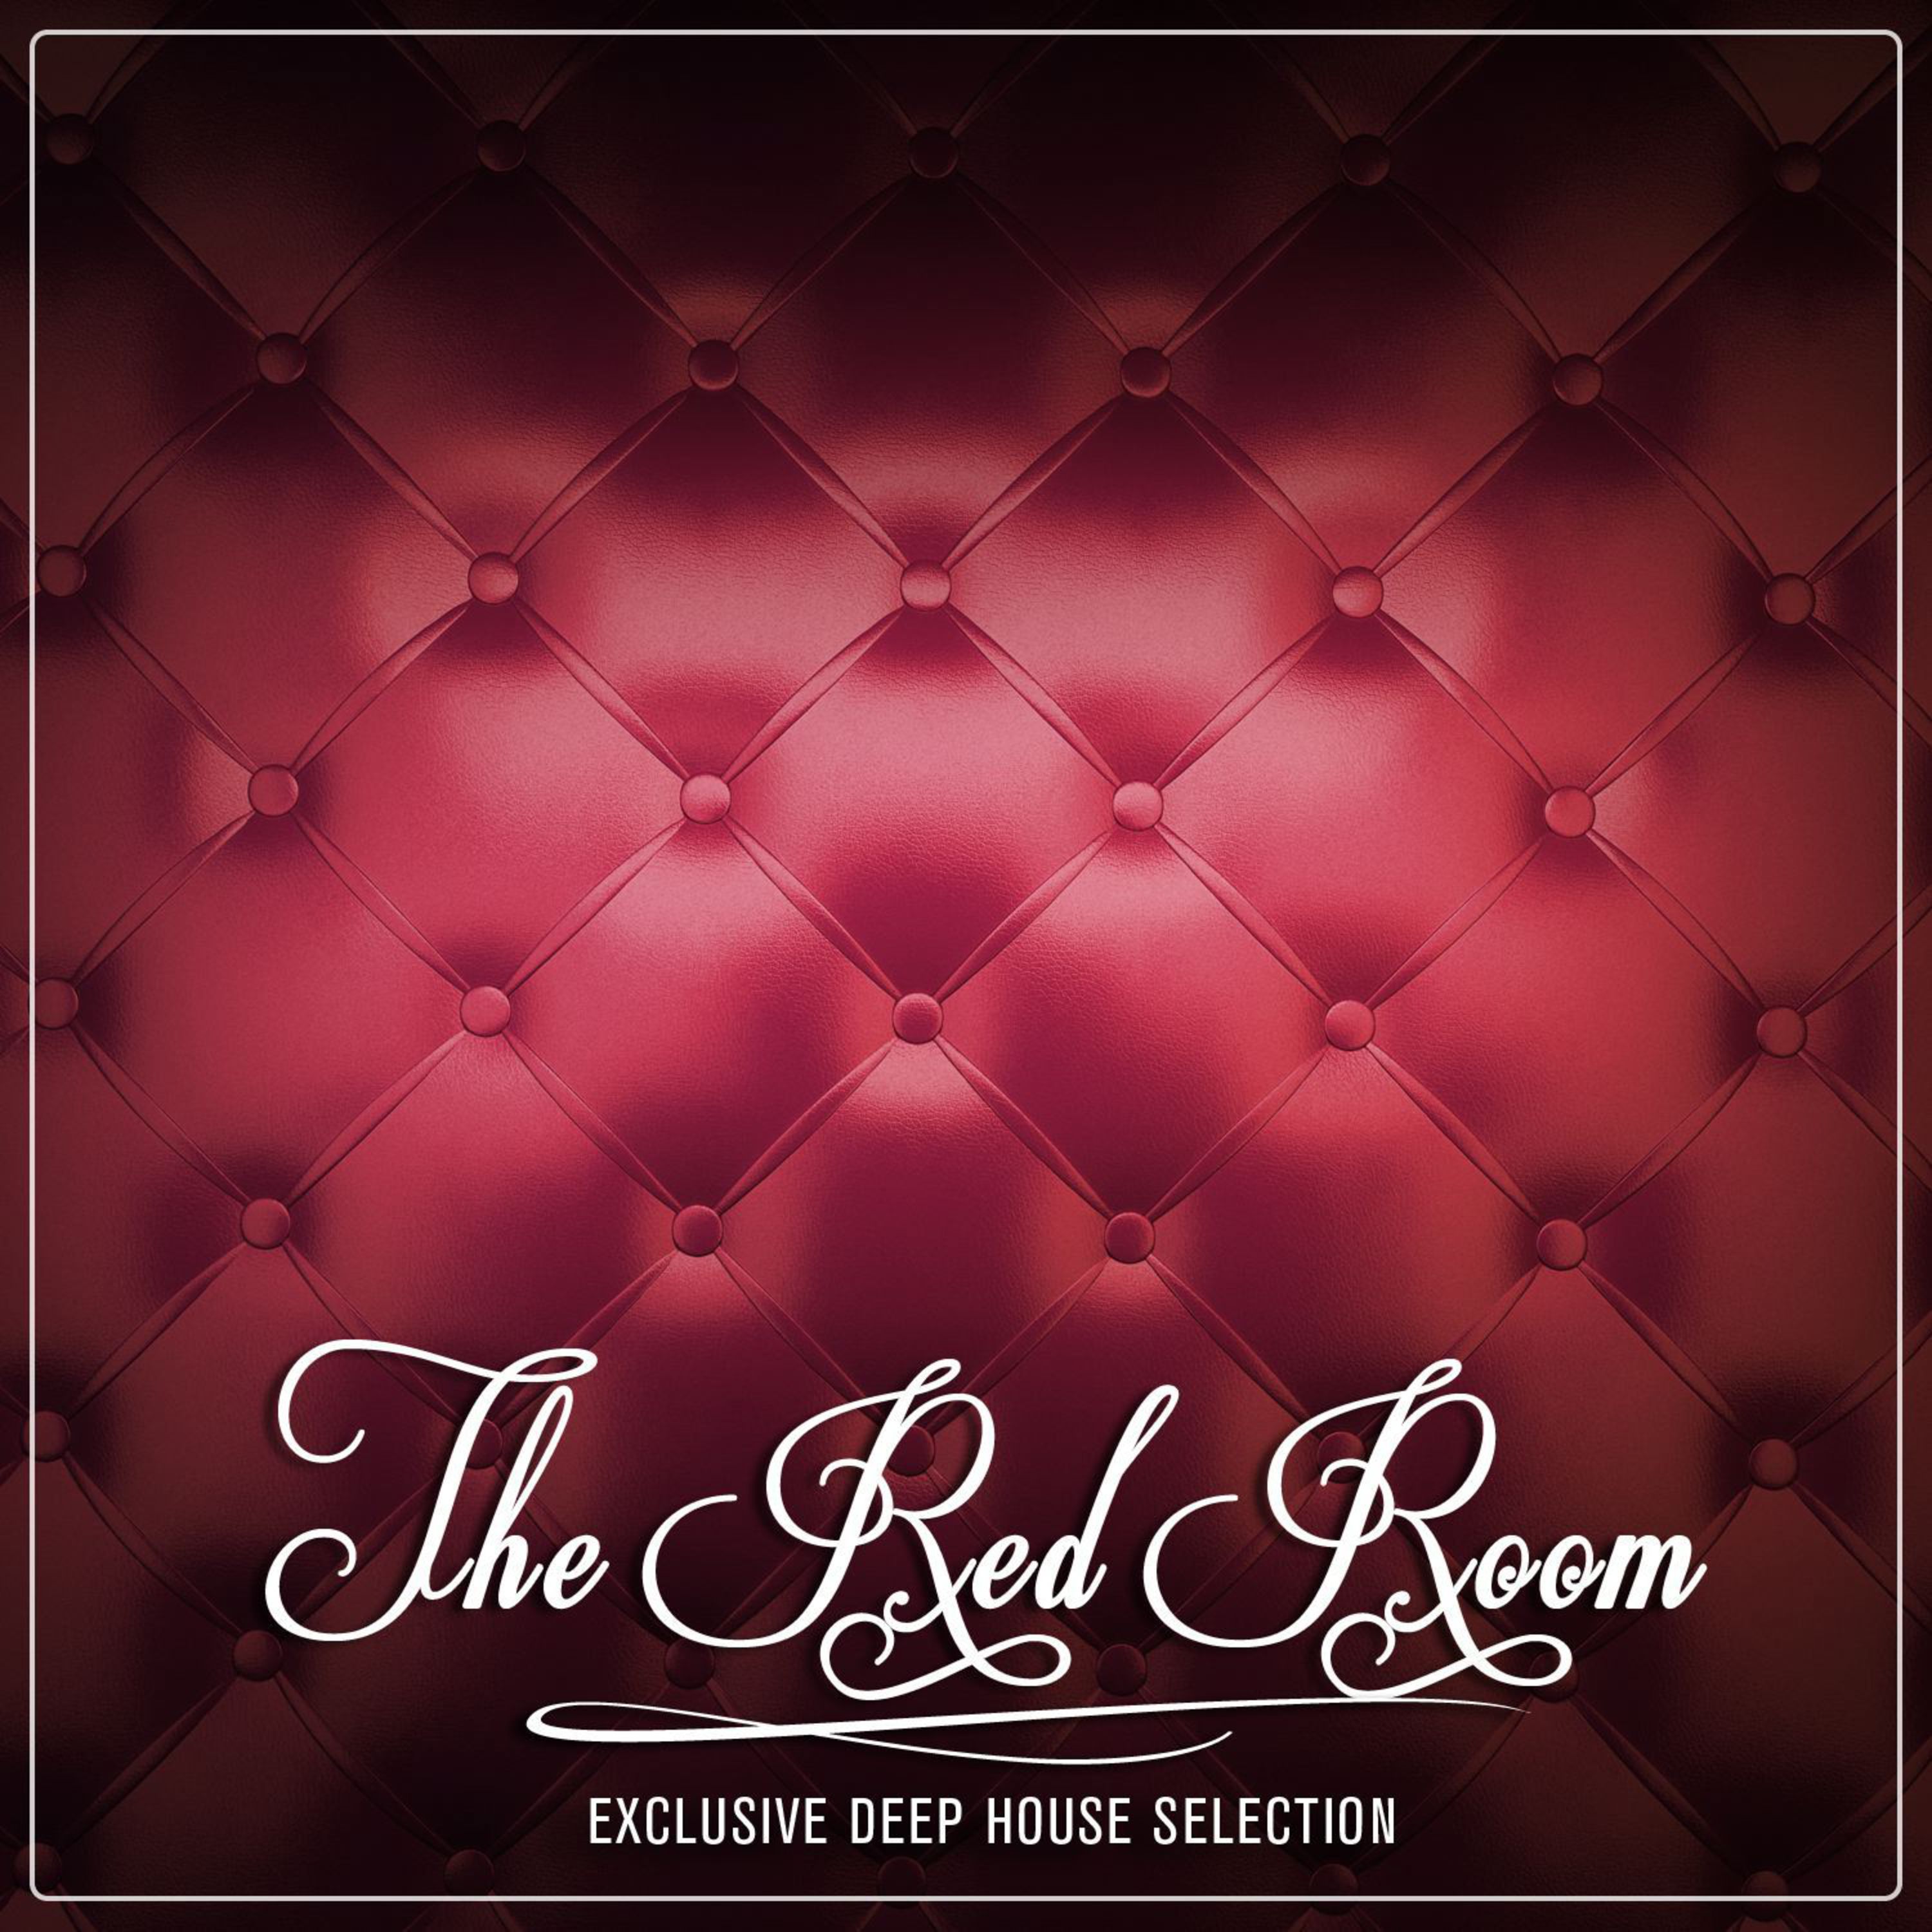 The Red Room - Exclusive Deep House Selection